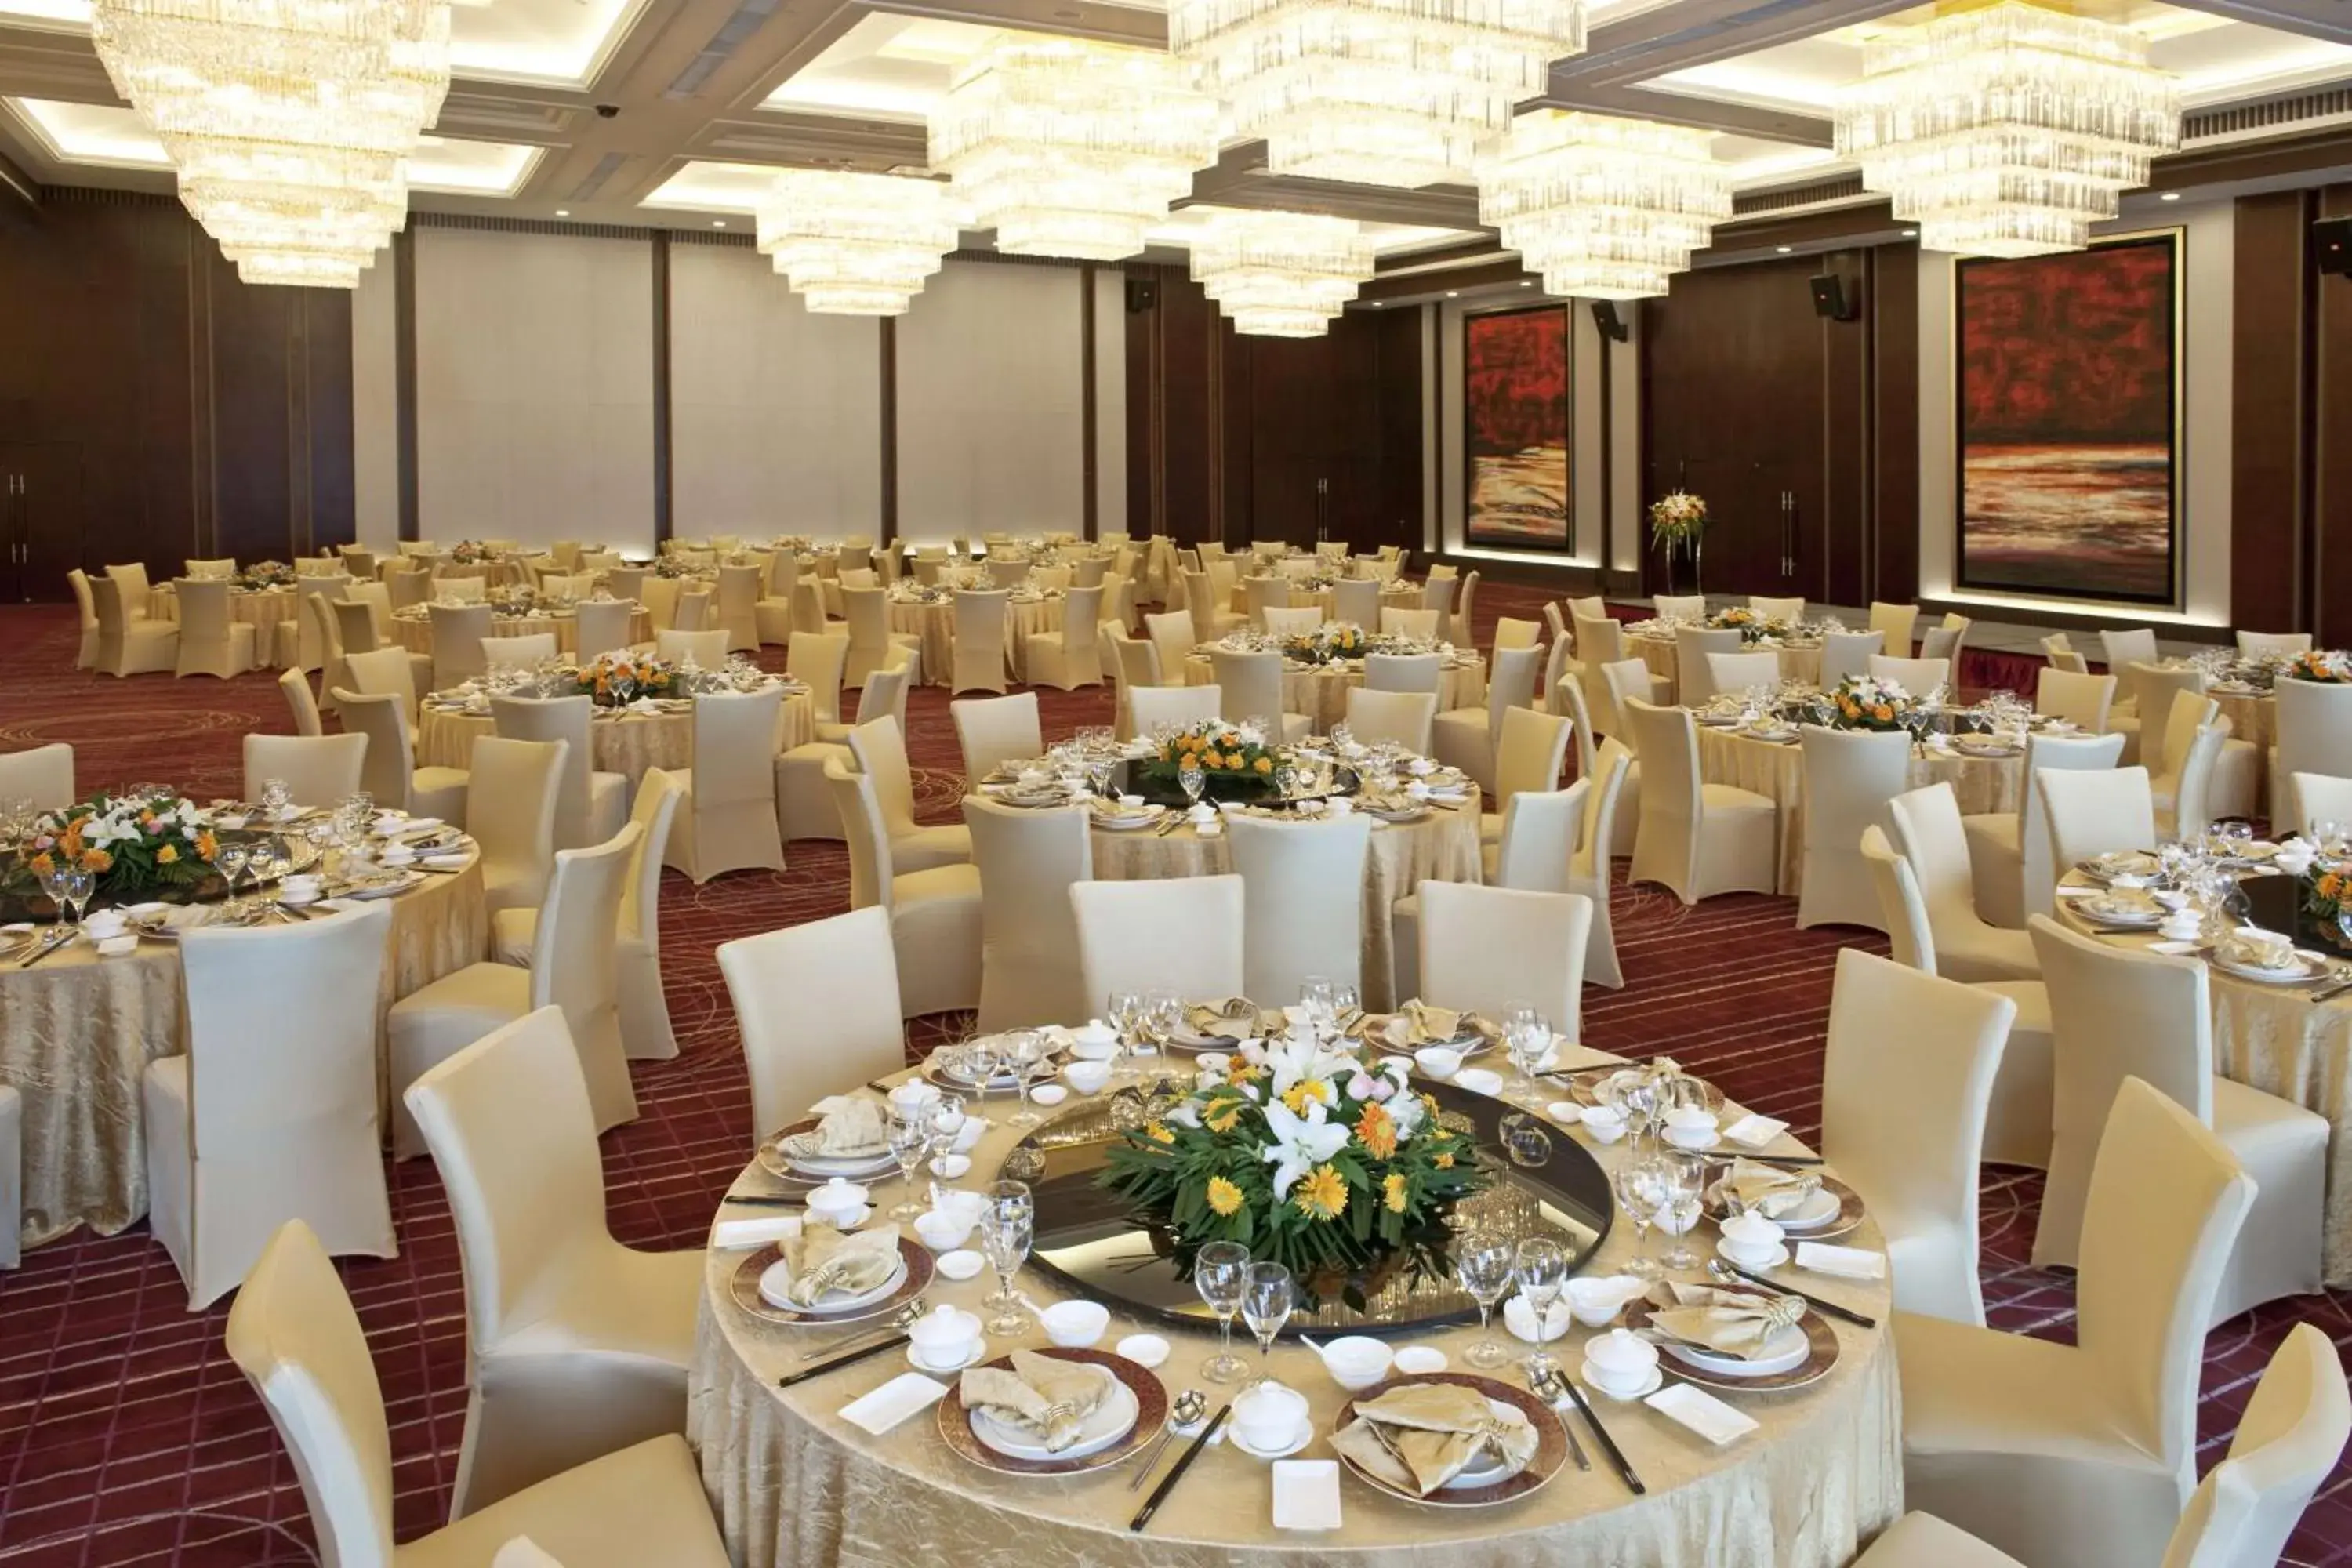 On site, Banquet Facilities in Radisson Tianjin